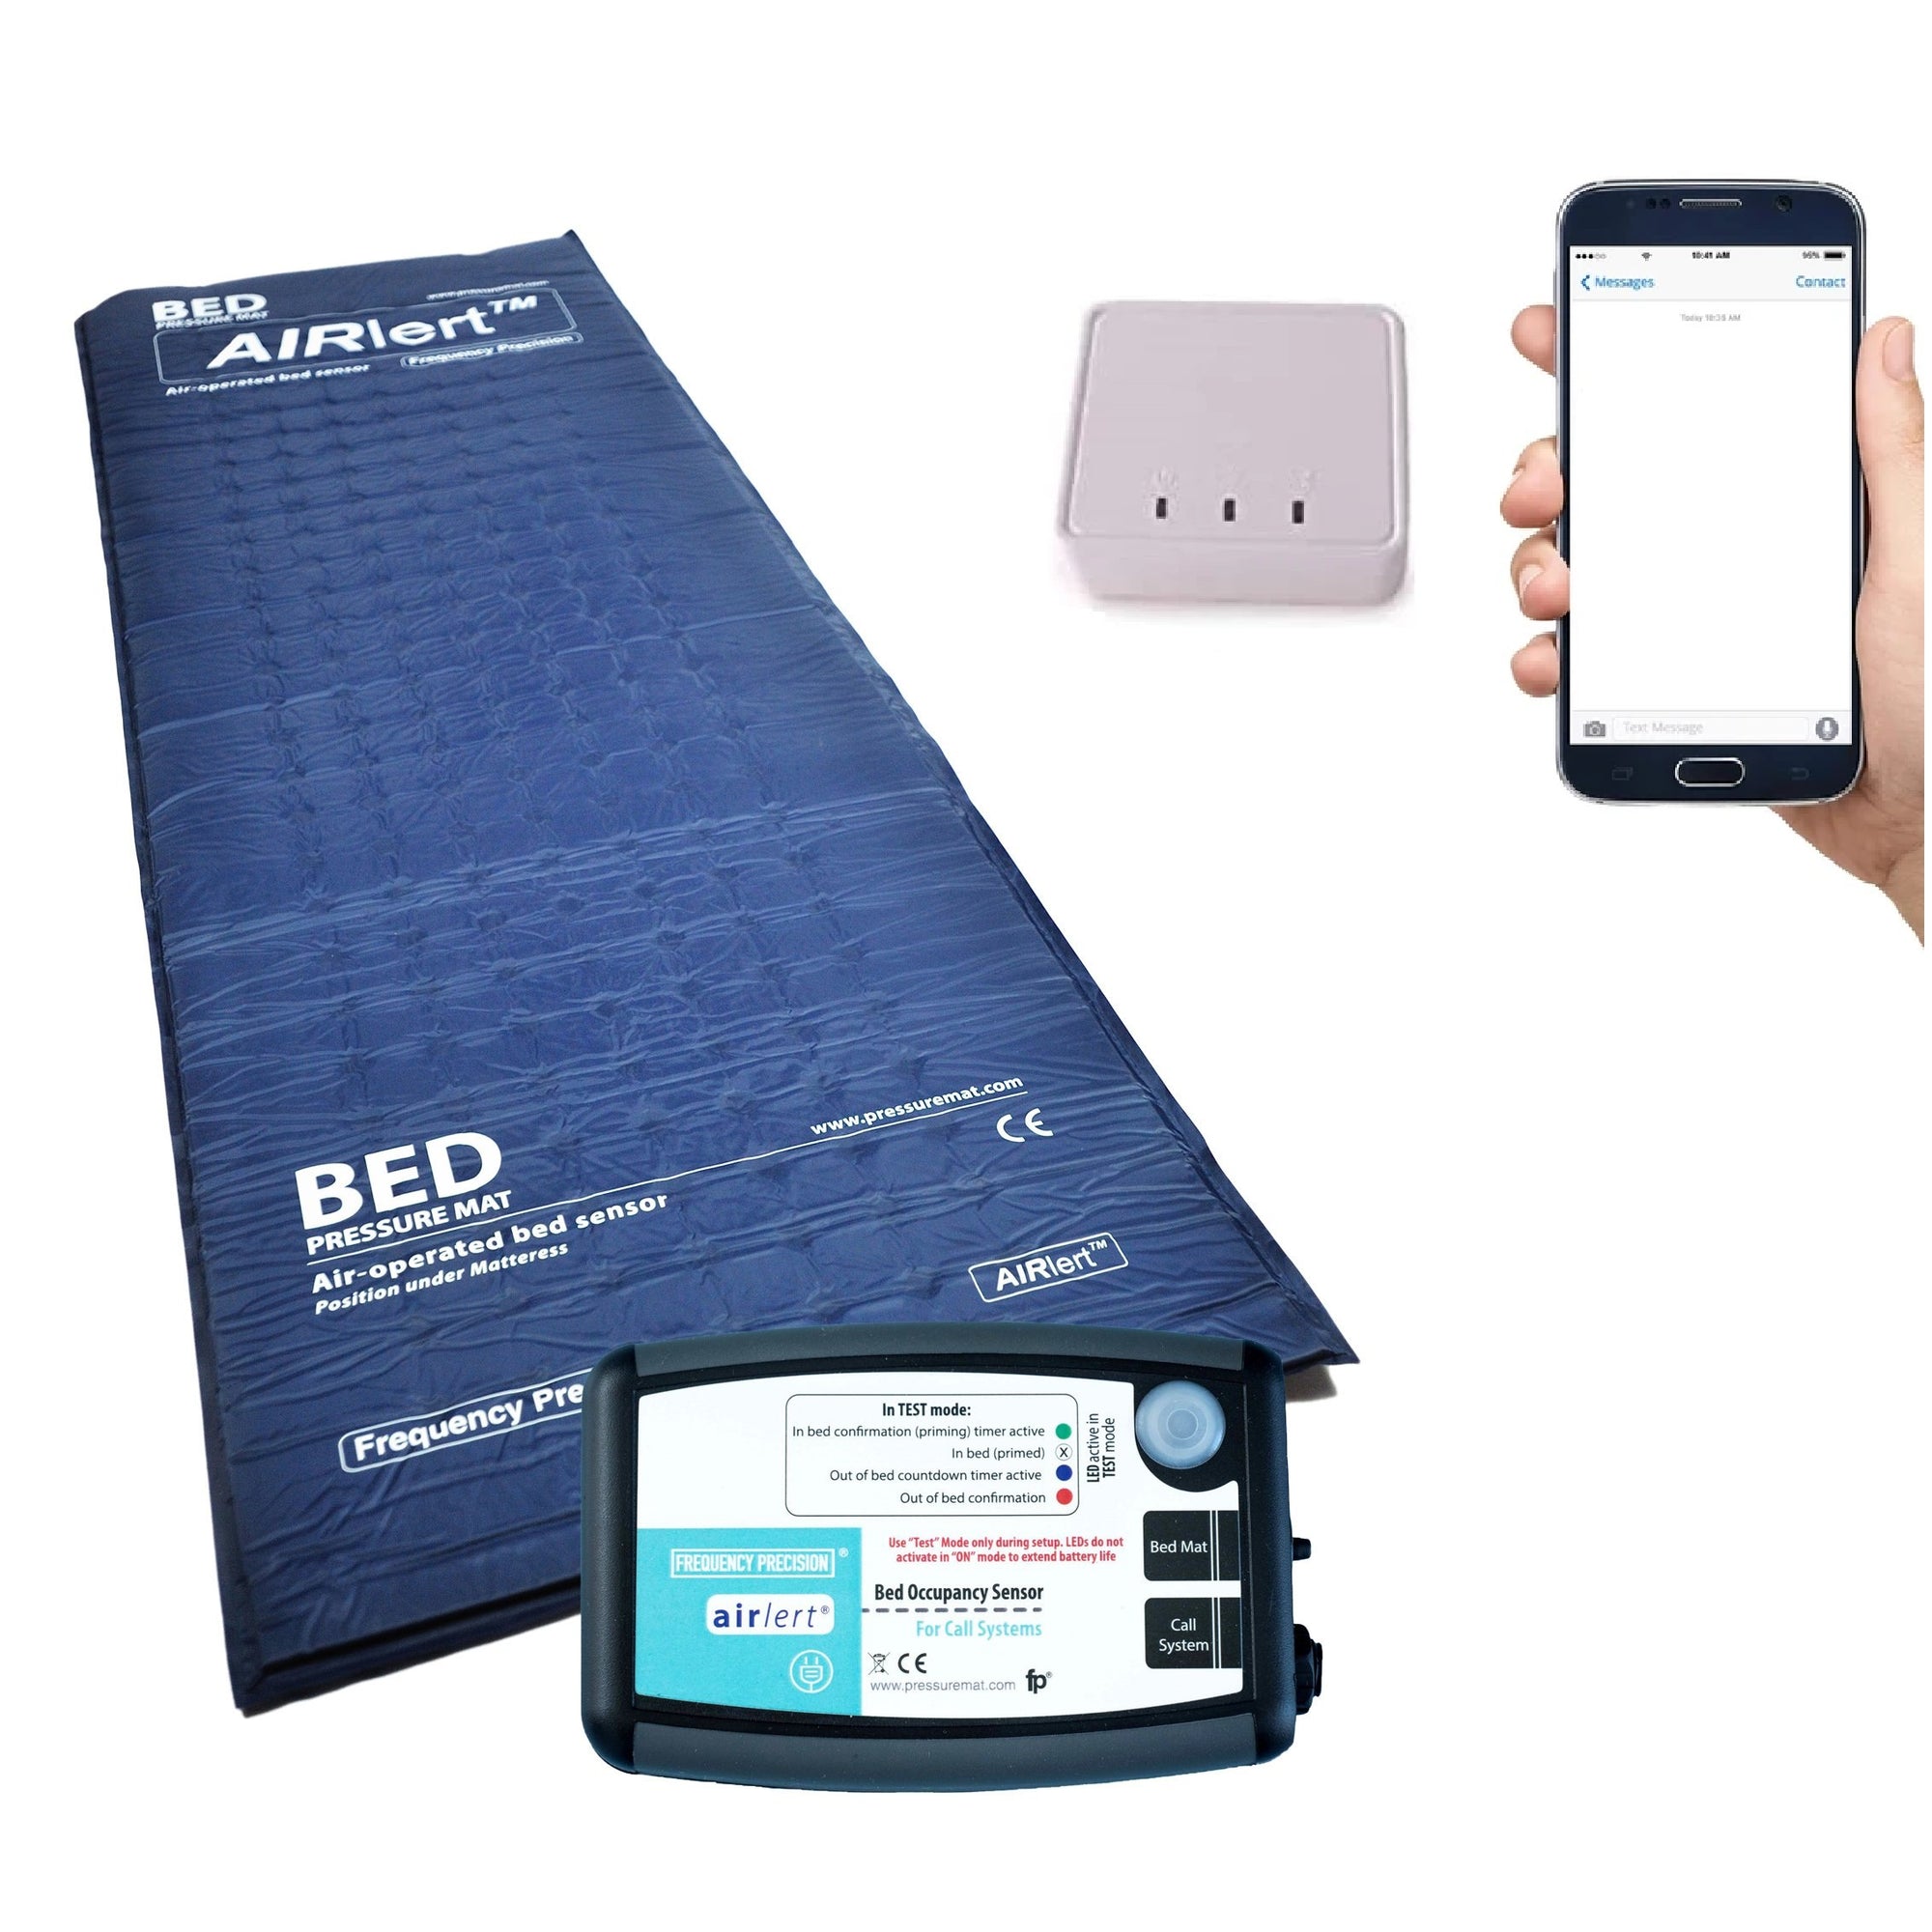 A product photo of the Wireless Bed Pressure Mat & Pager set, with a person holding a phone